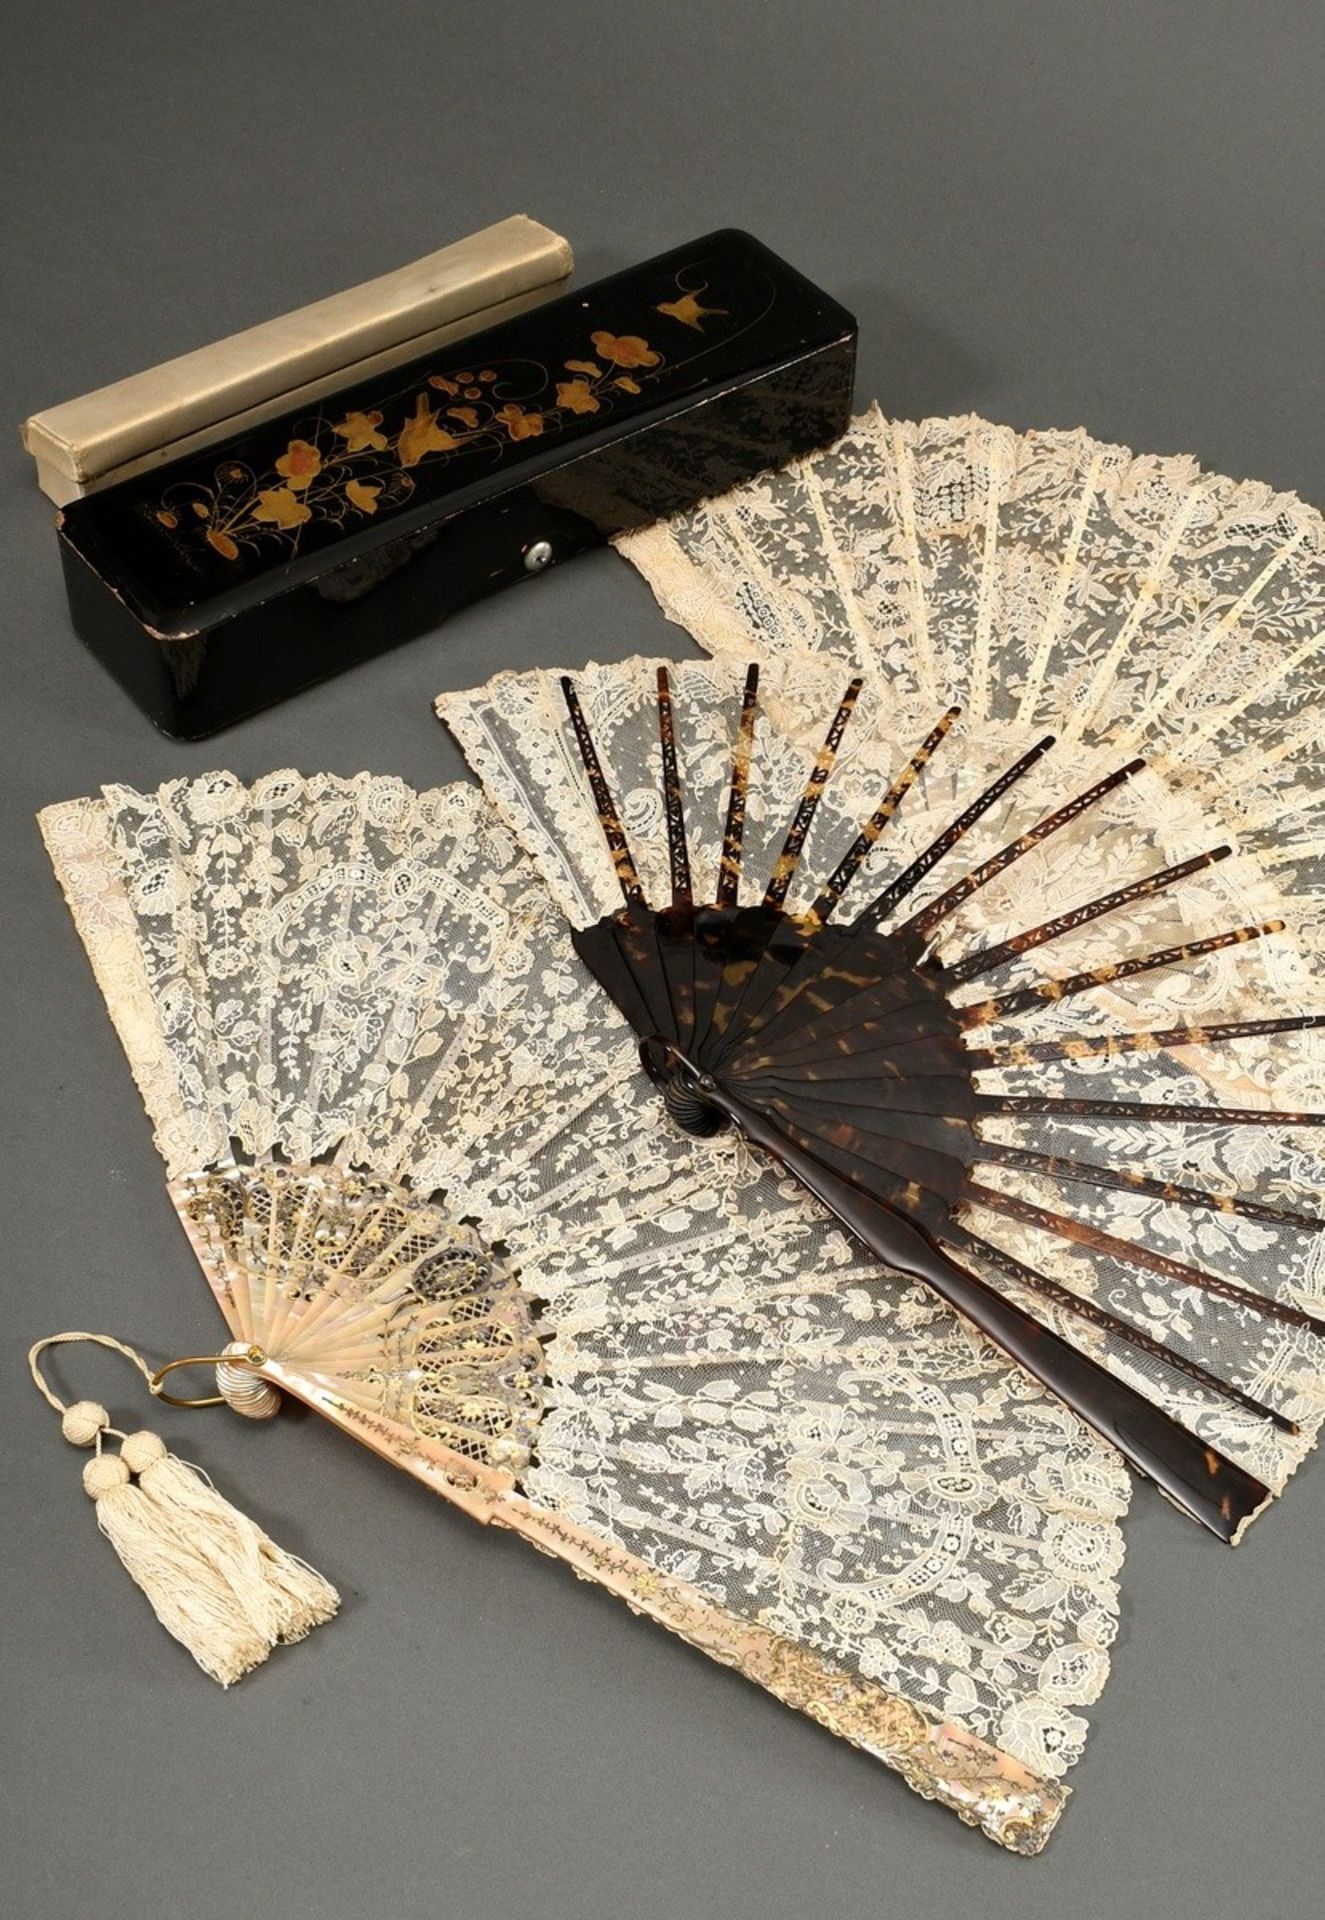 3 Various lace fans, 1x tortoiseshell in silk-covered box by Stern Brothers New York, 1x mother-of-